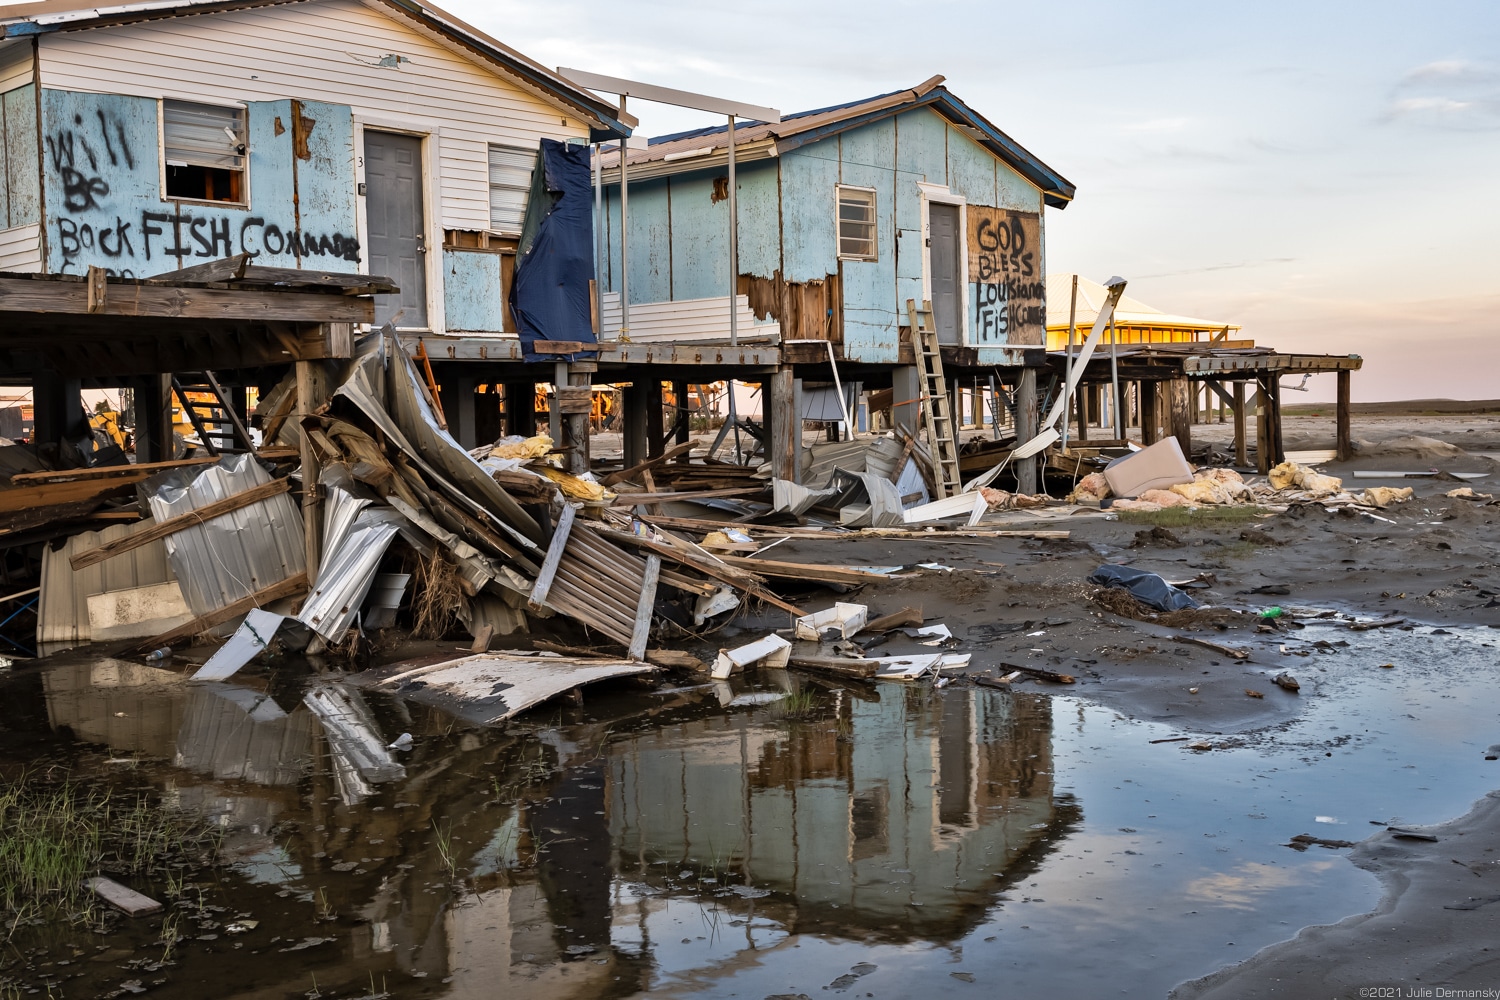 Damaged fishing camp houses and floodwaters at sunset